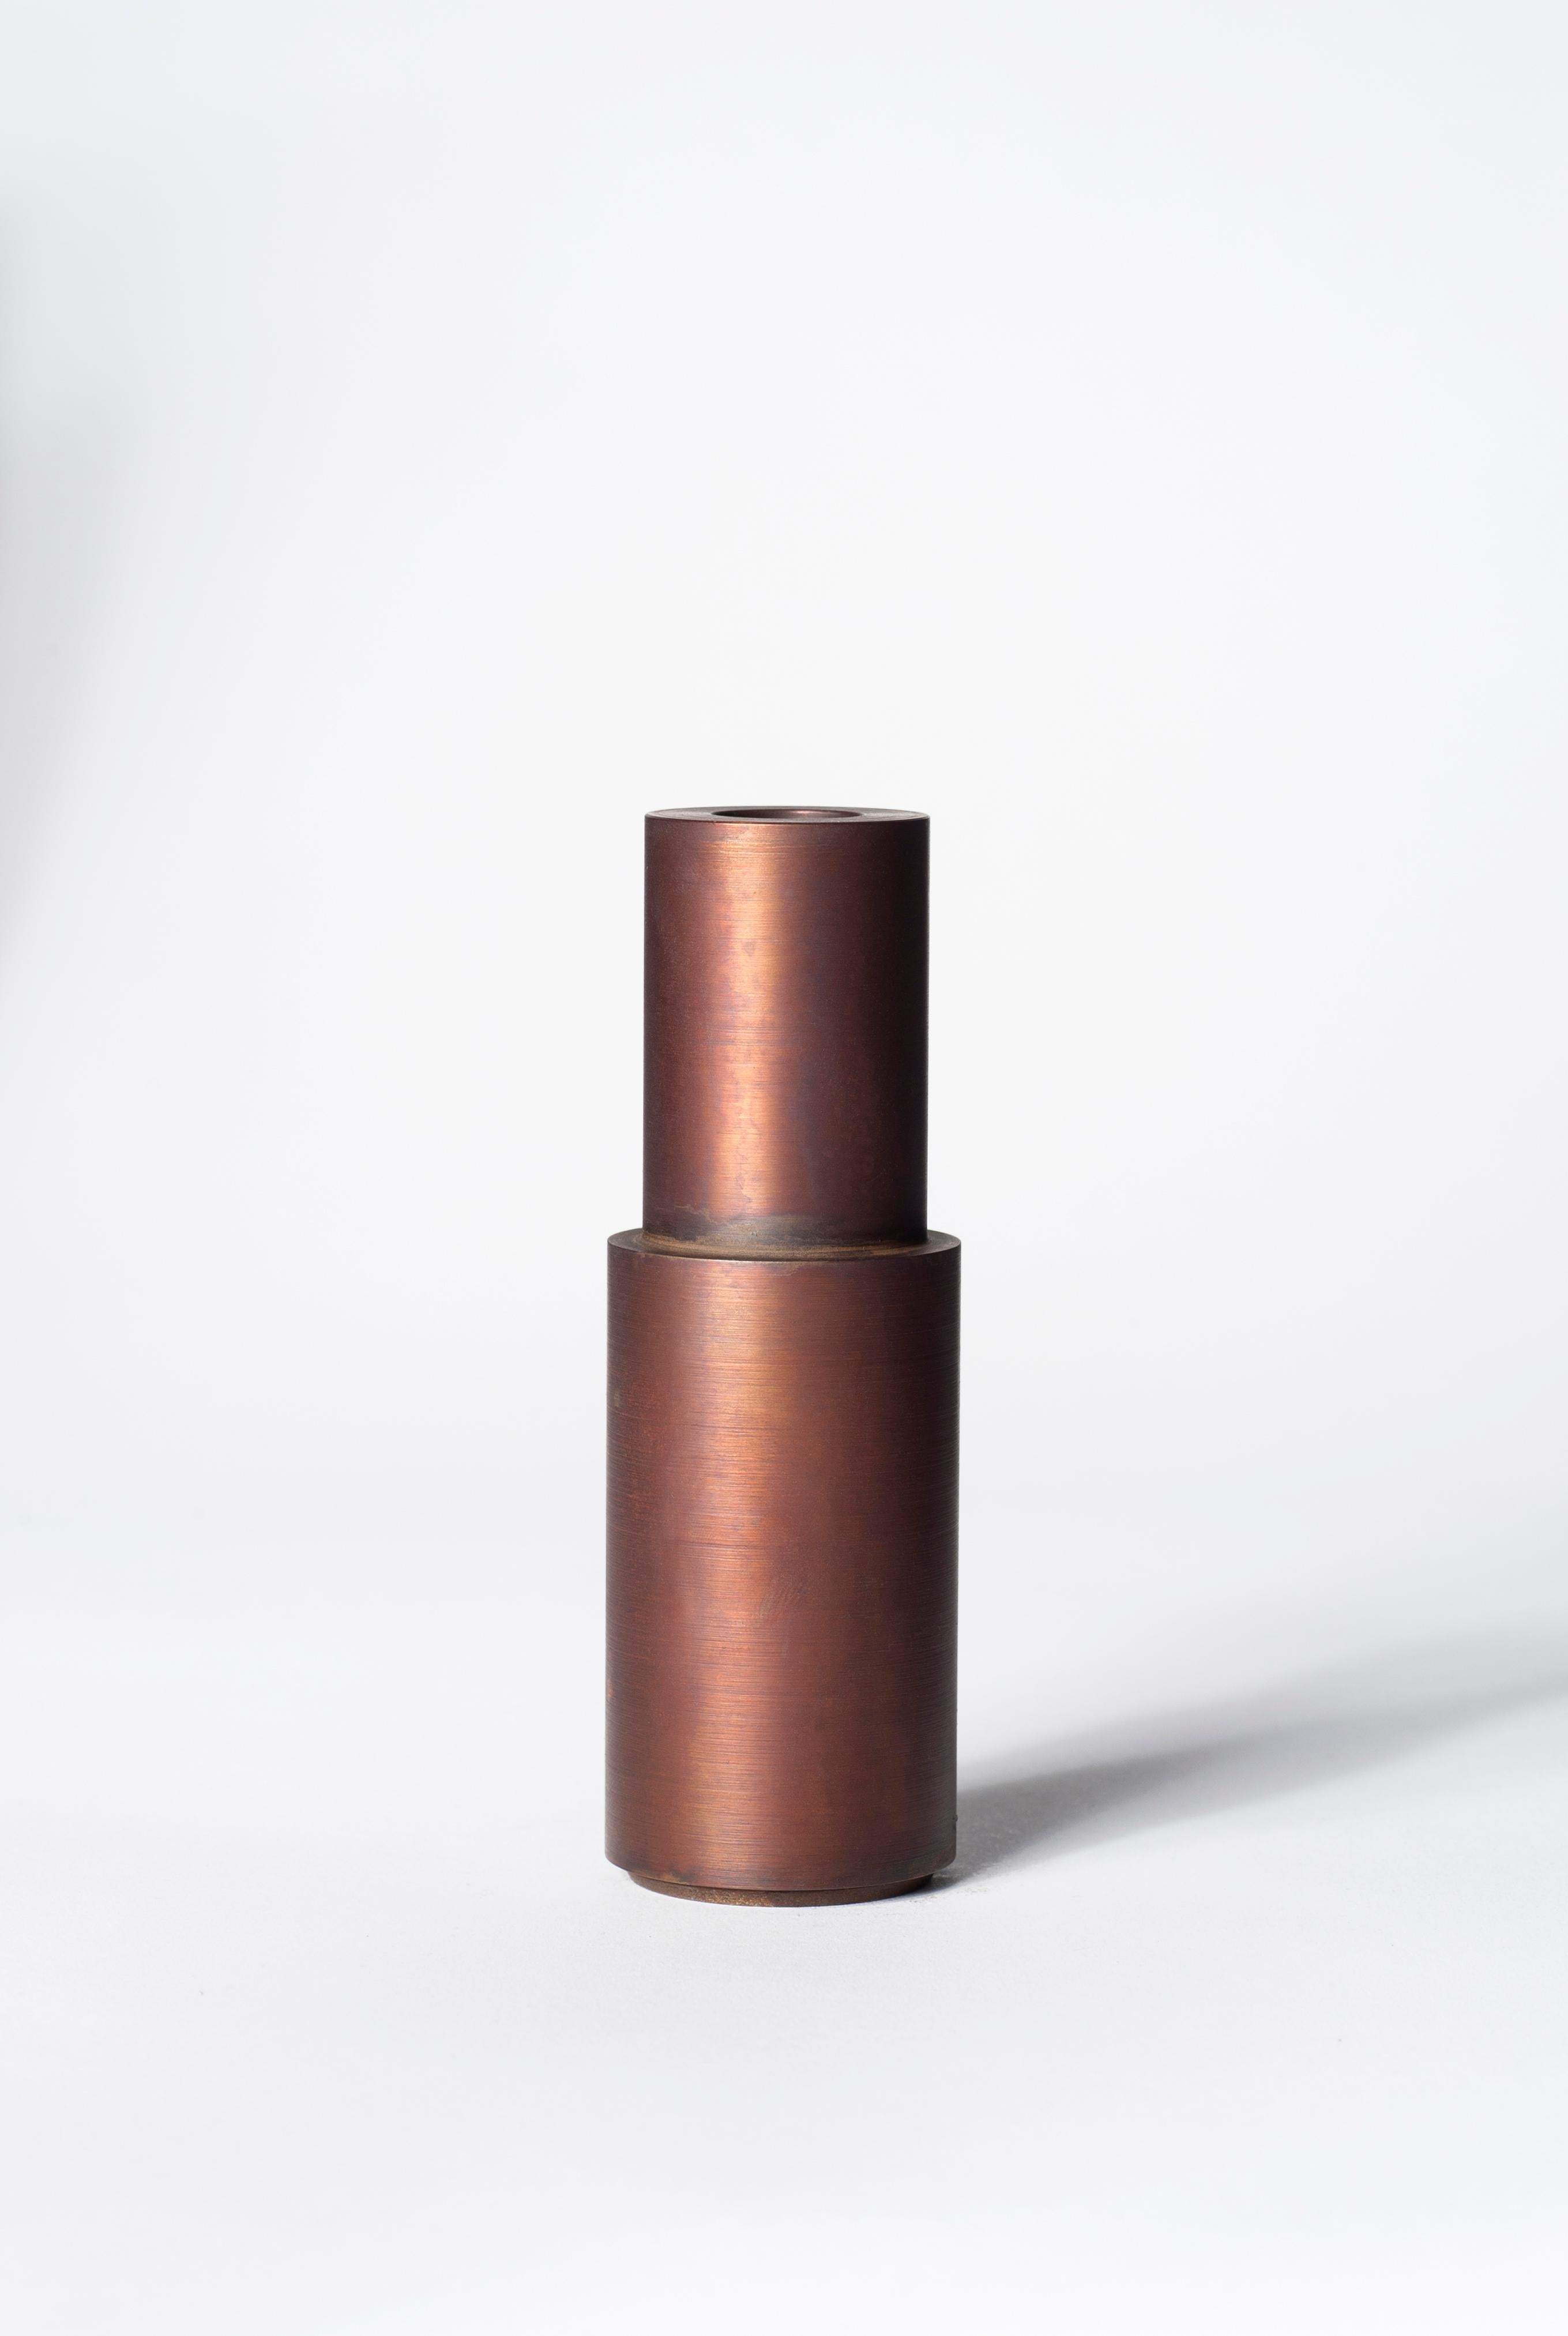 Brown patina steel candlestick by Lukasz Friedrich.
Dimensions: D 5 x H 15 cm
Materials: Brown patina on steel.